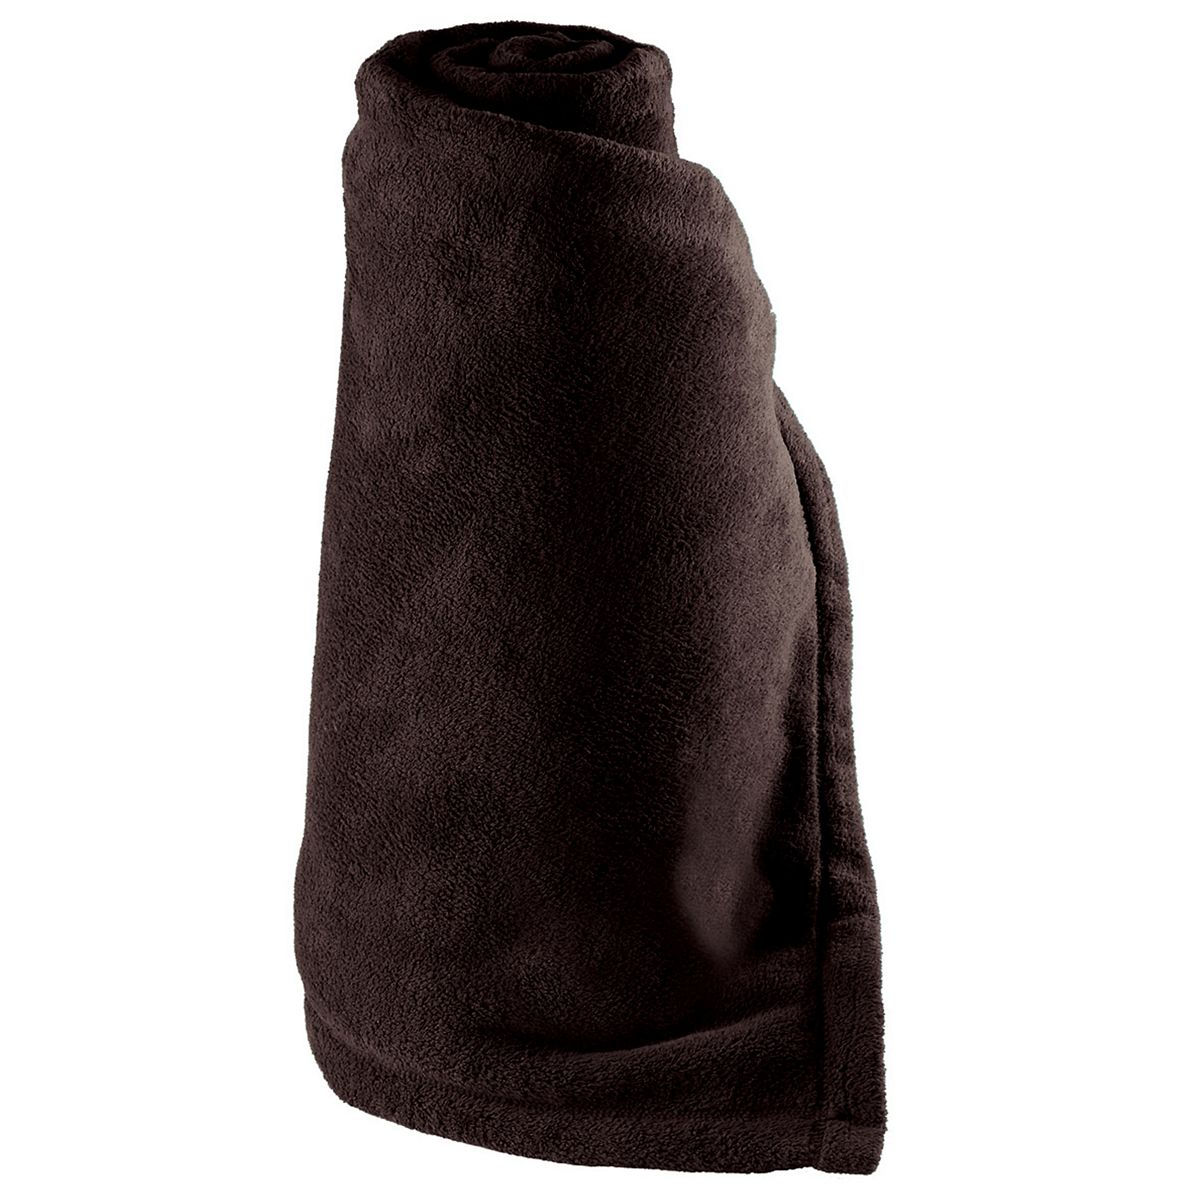 Picture of Holloway 223856.080.OS Tailgate Blanket, Black - One Size